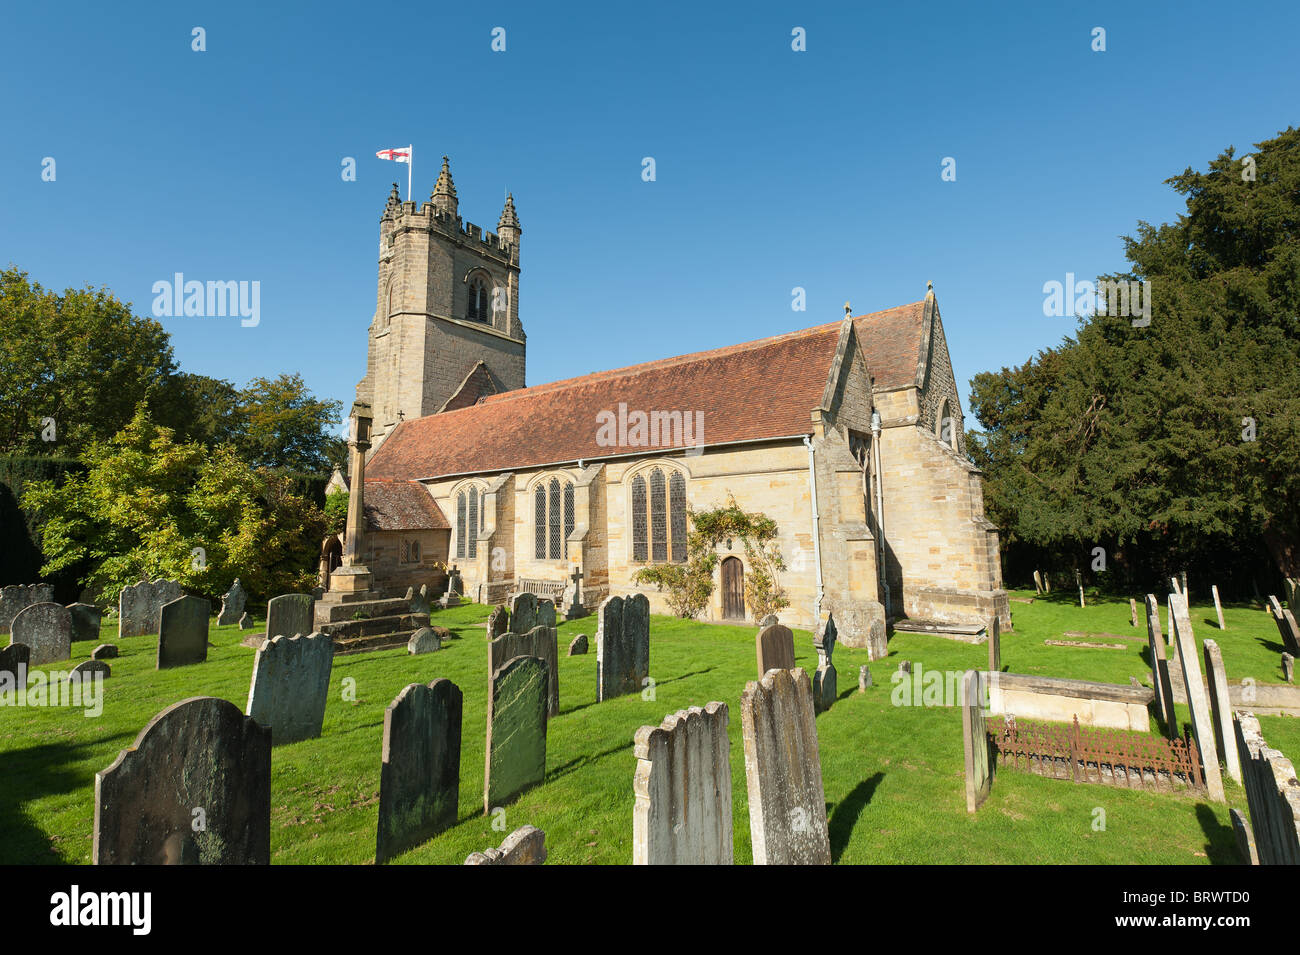 St Mary the Virgin Chiddingstone Church Kent England on bright sunny day with blue skies and well kept grounds Stock Photo